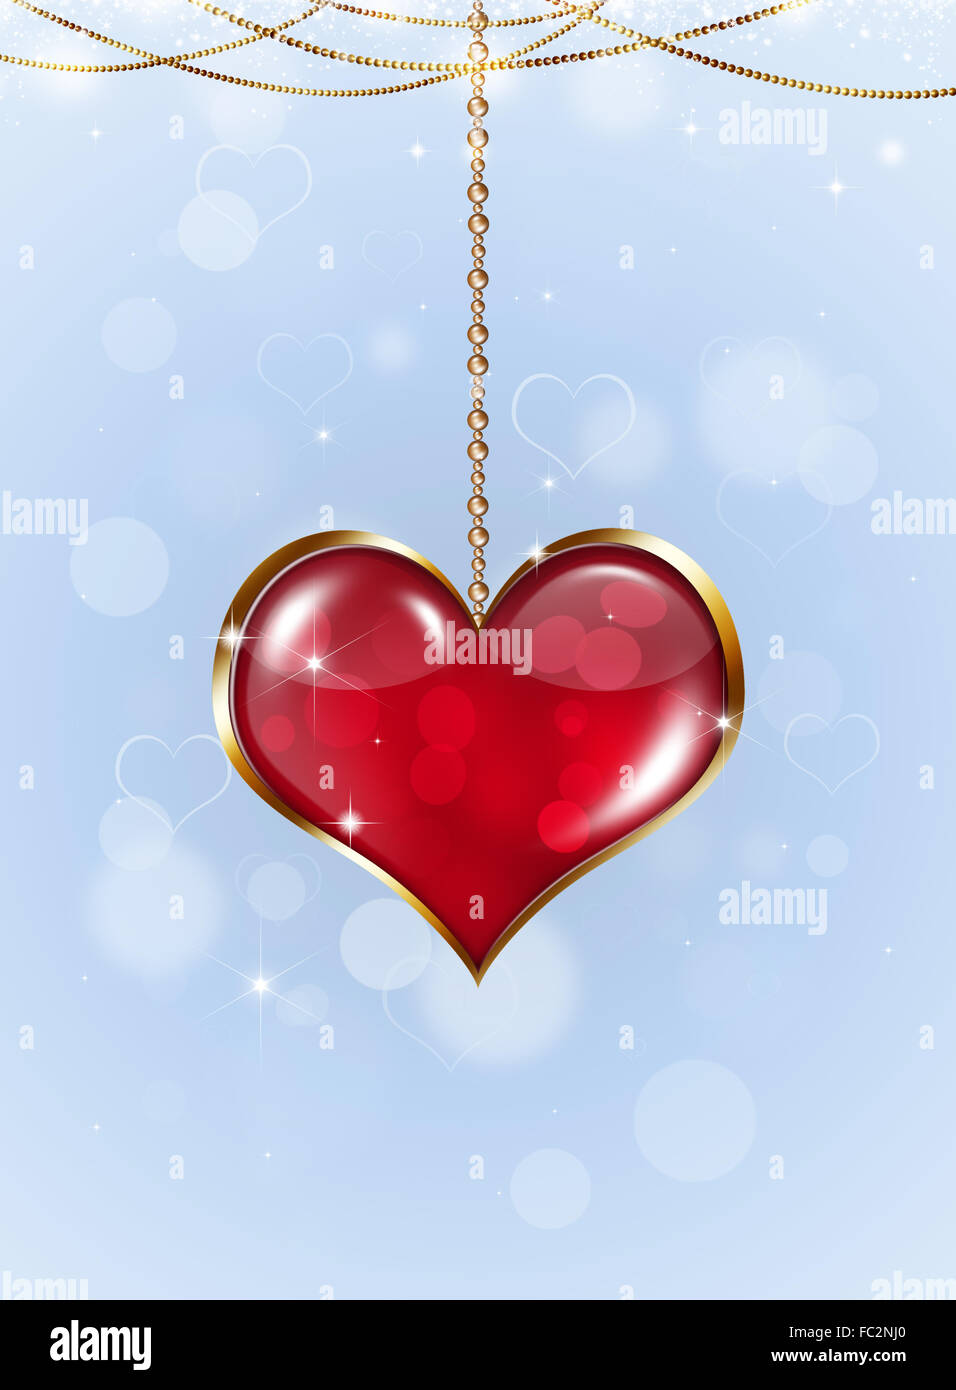 valentine golden heart on bright holiday background with stars and blurry lights Stock Photo